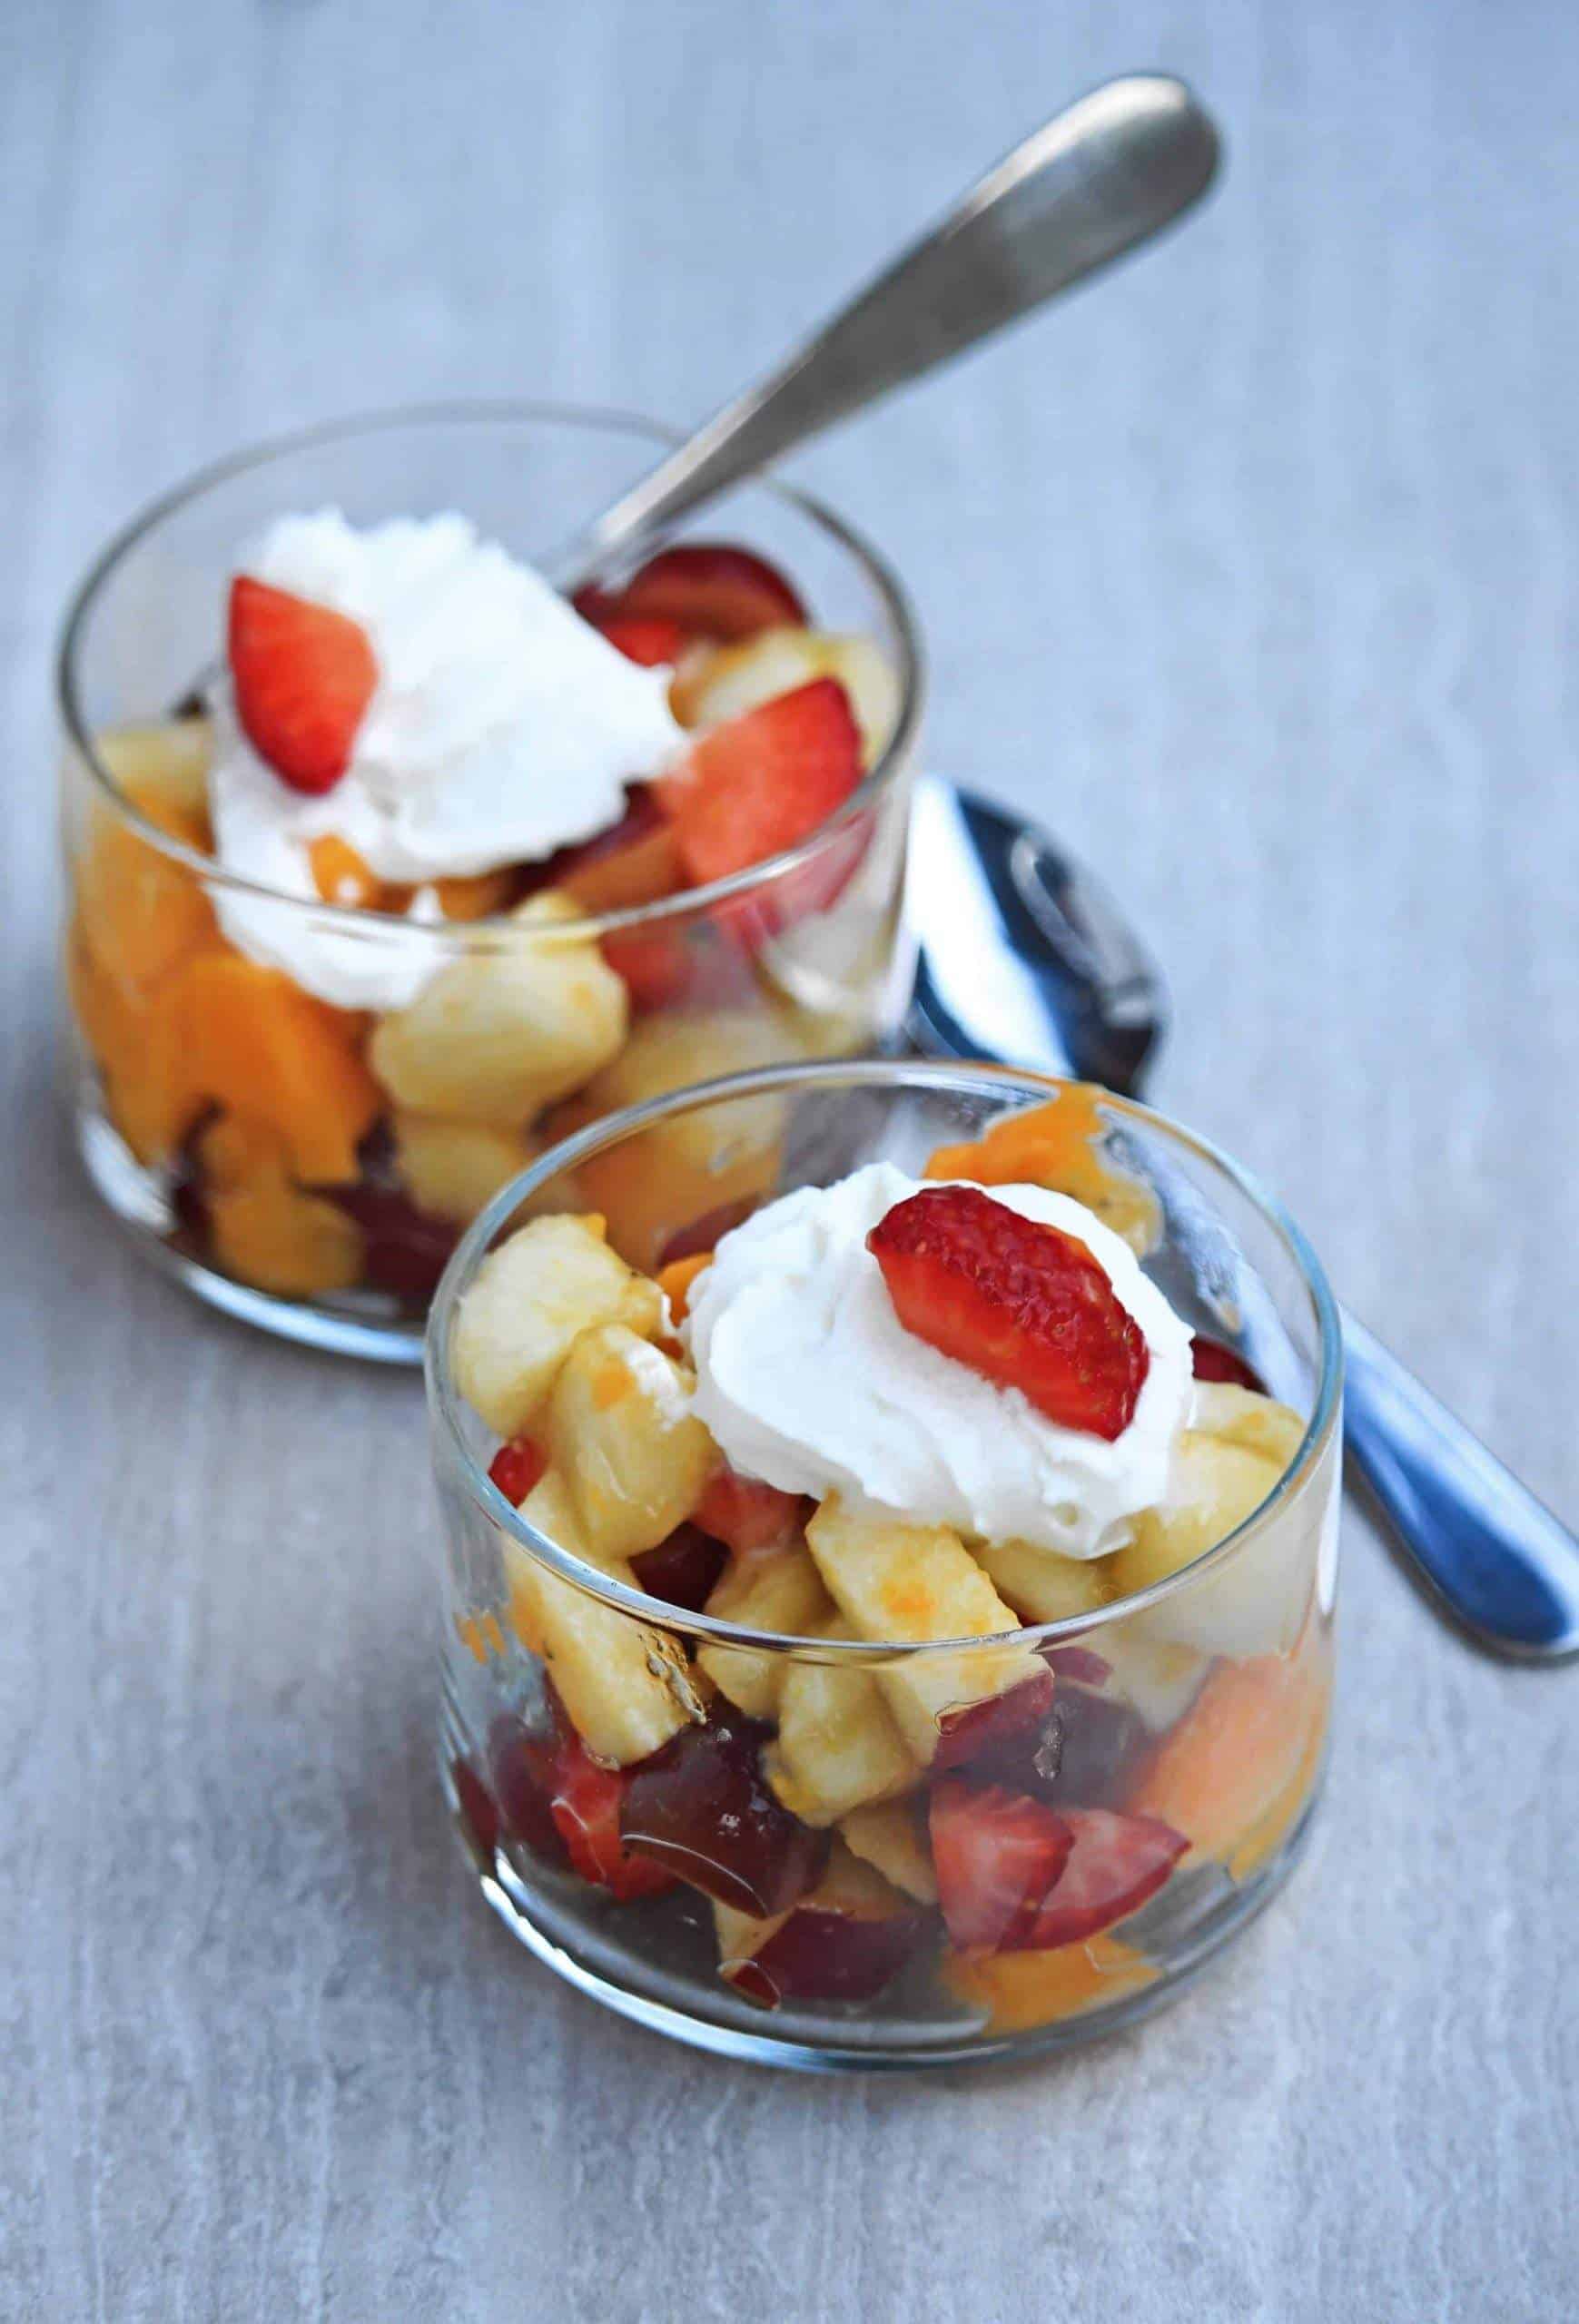 Fruit Salad in a glass bowl.